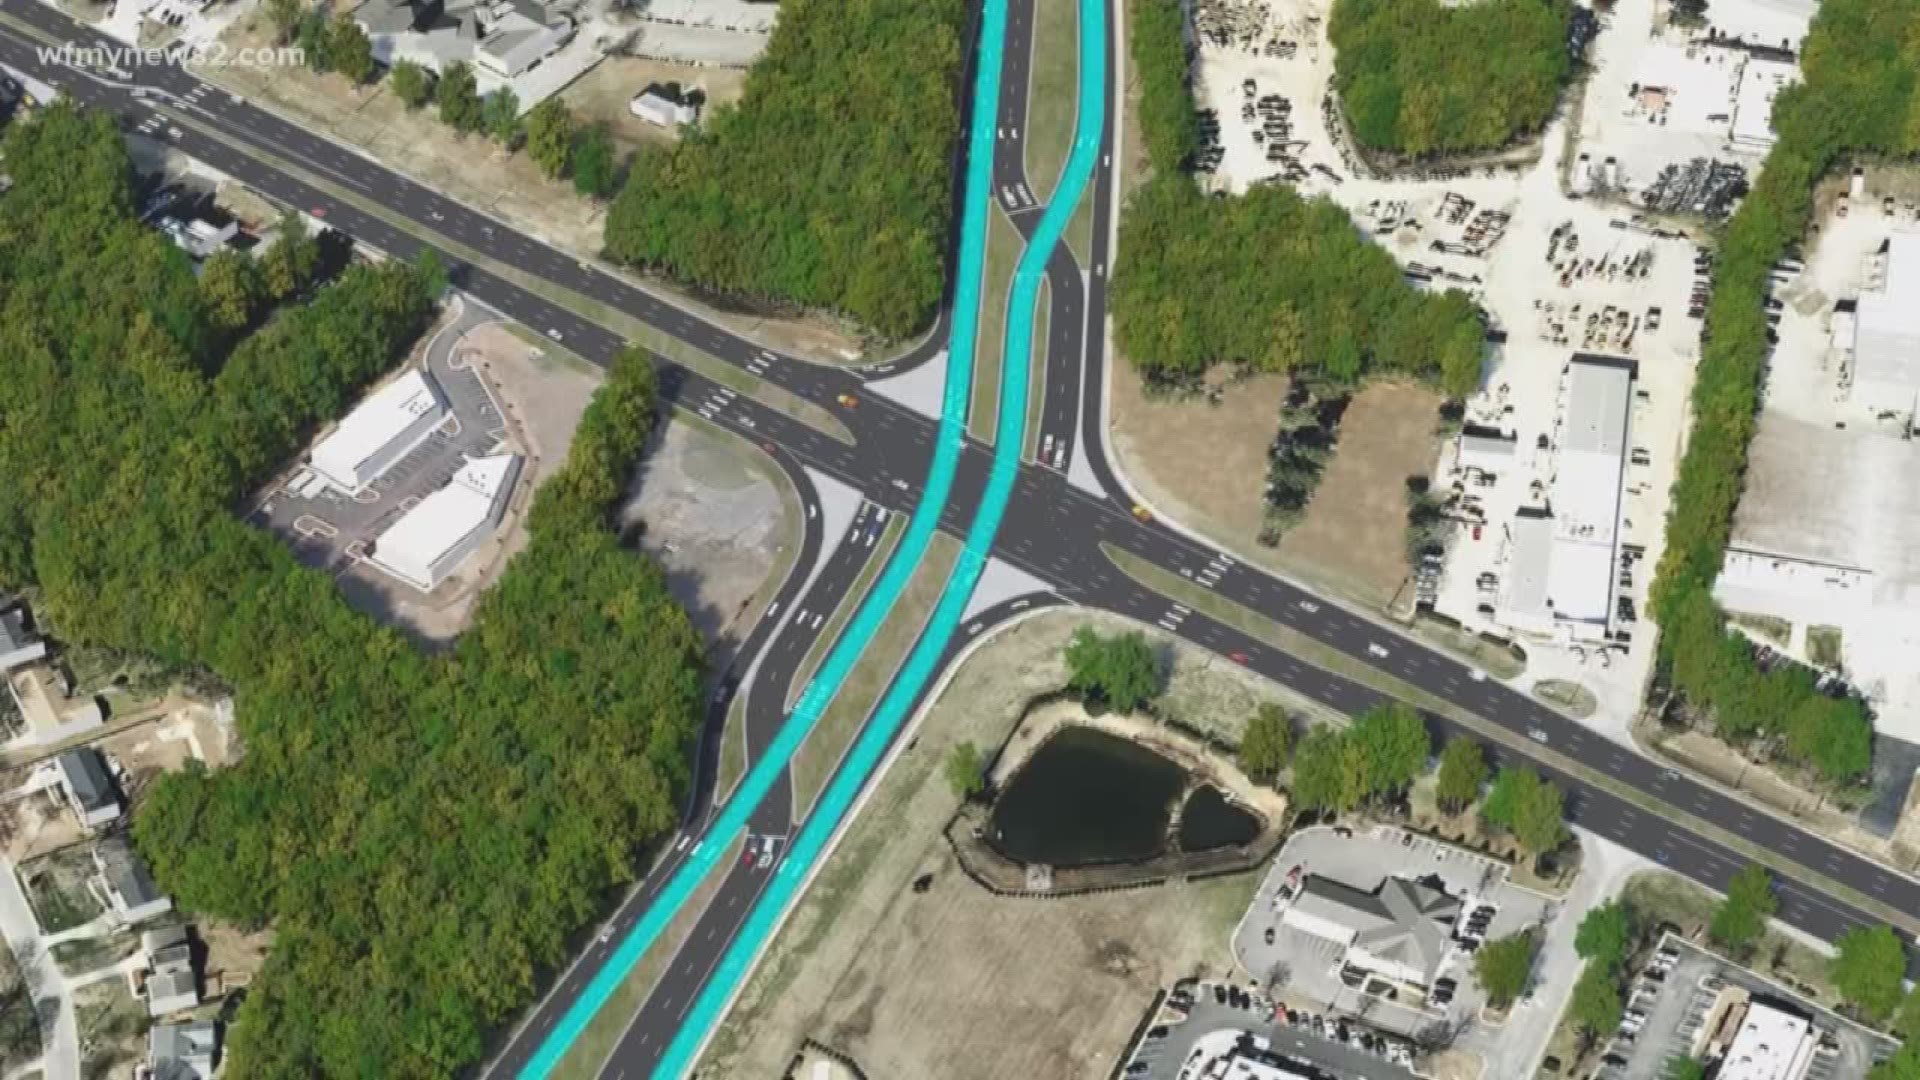 NCDOT hopes the new type of intersection could help cut down on congestion